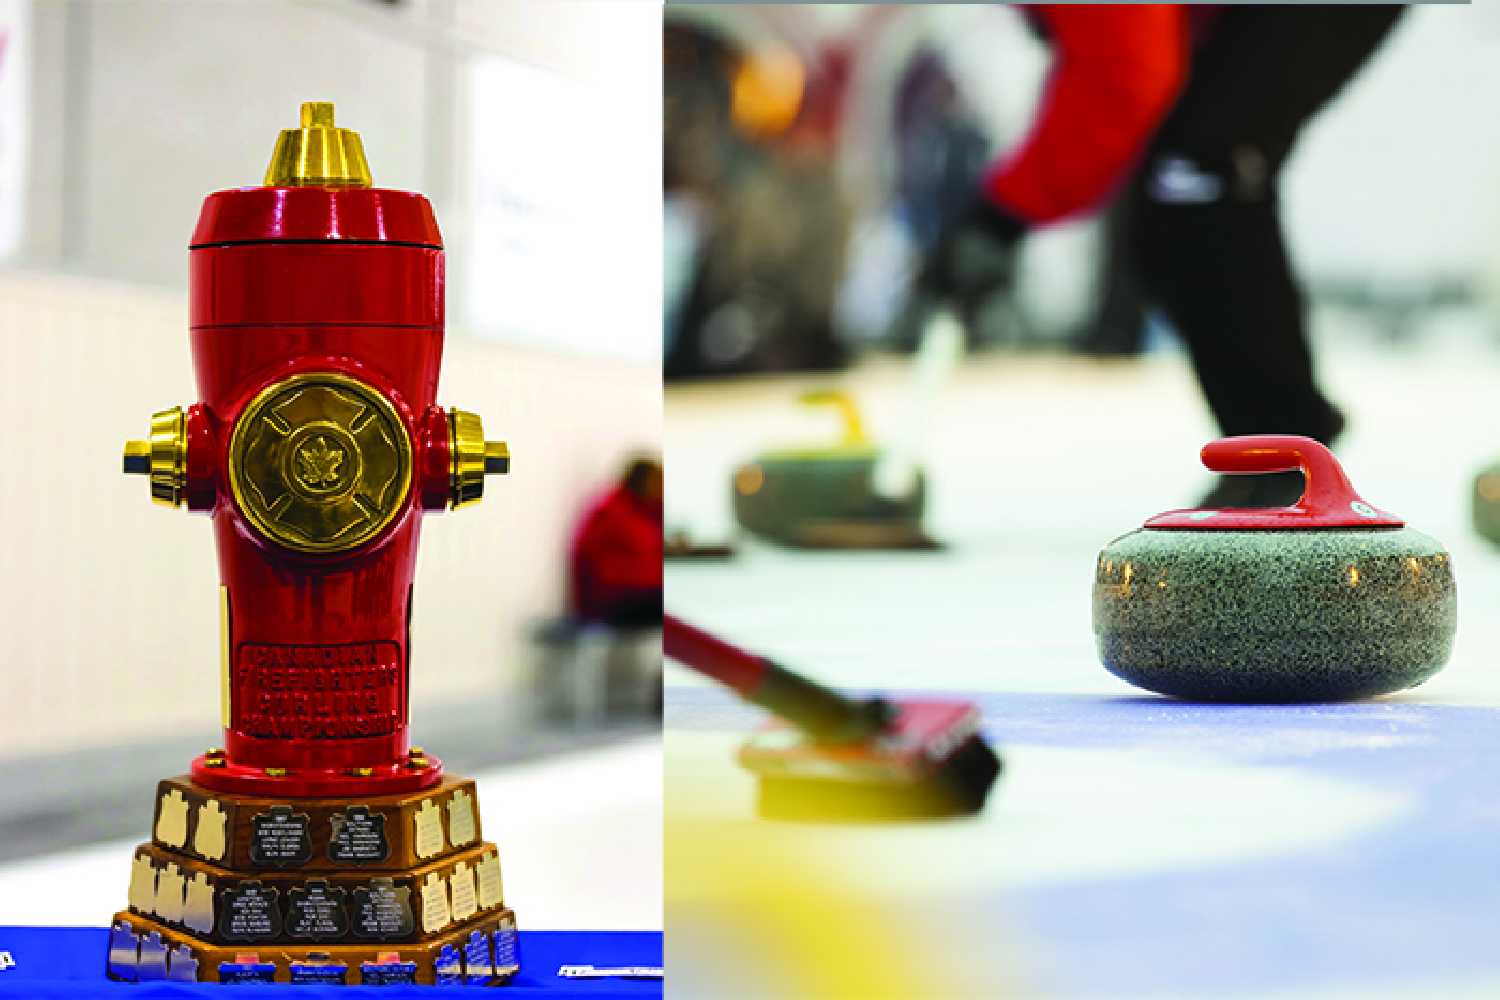 The Canadian Firefighters Curling Associations Championship trophy